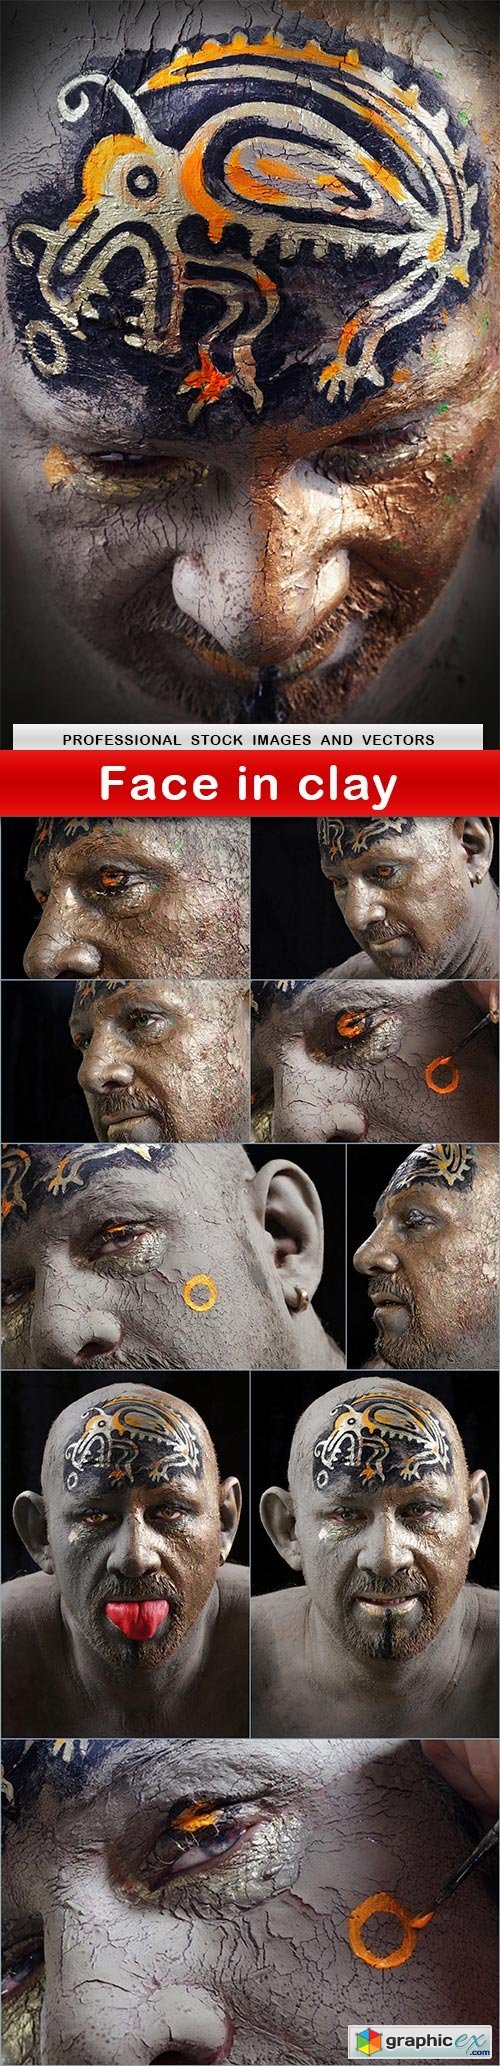 Face in clay - 10 UHQ JPEG